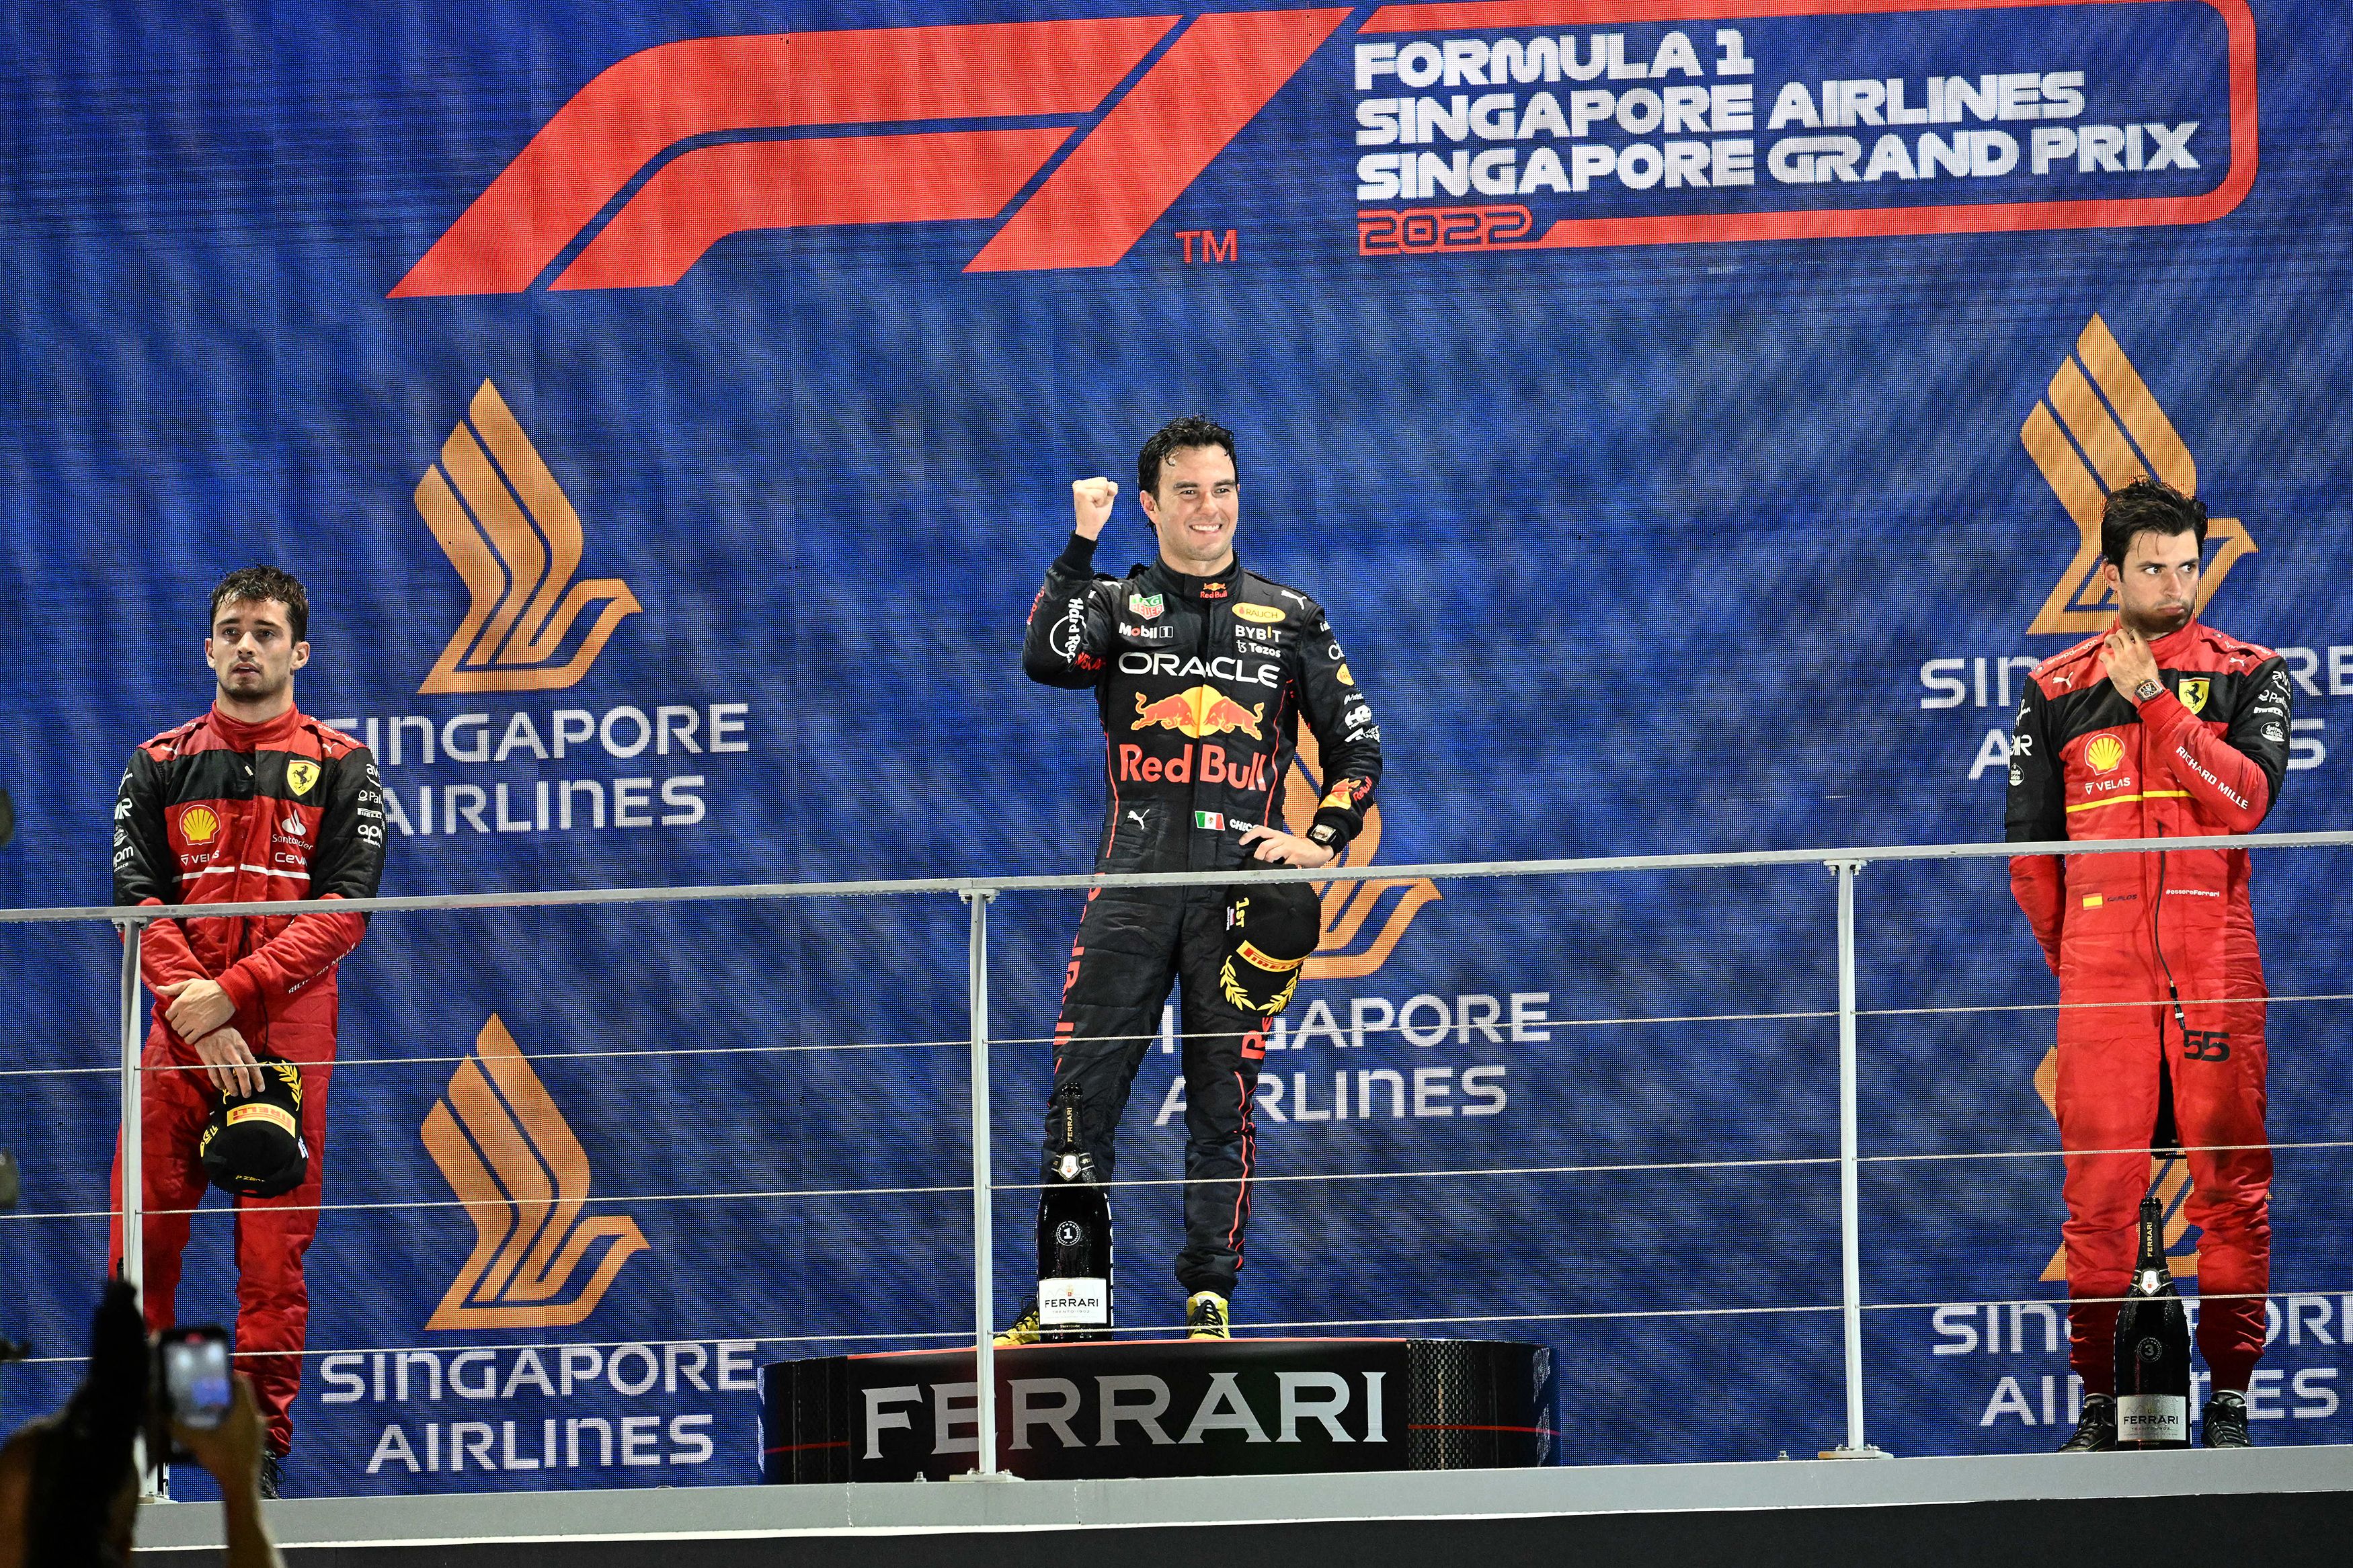 Red Bull ’s Perez took the chequered flag ahead of Charles Leclerc with his Ferrari team-mate Carlos Sainz completing the podium